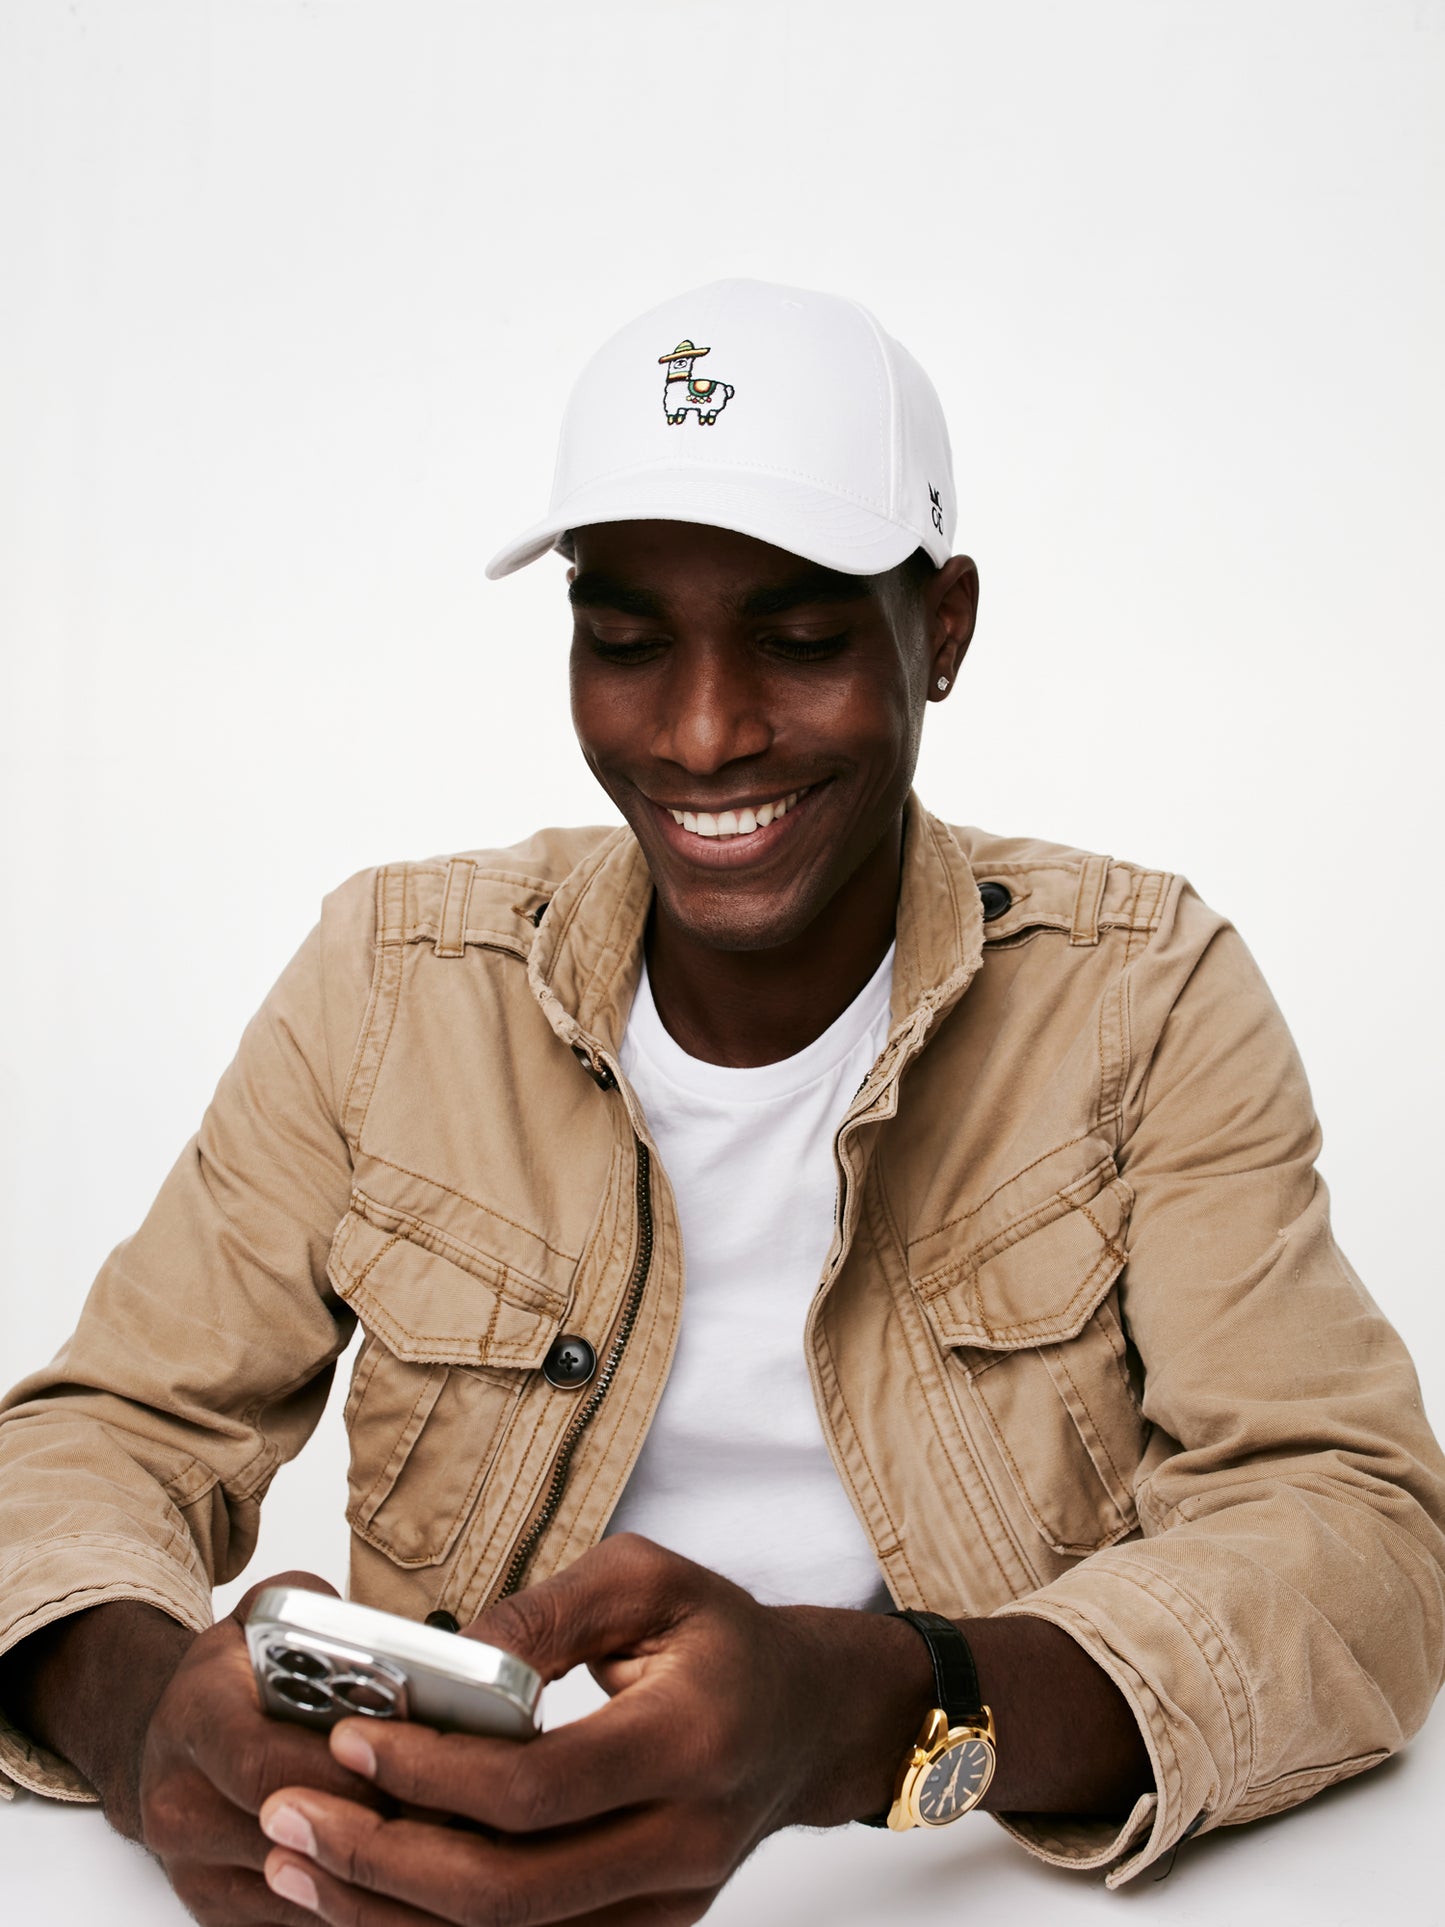 Load image into Gallery viewer, MOOD male model wearing Mexillama baseball cap in white color product shoot and smiling using his phone
